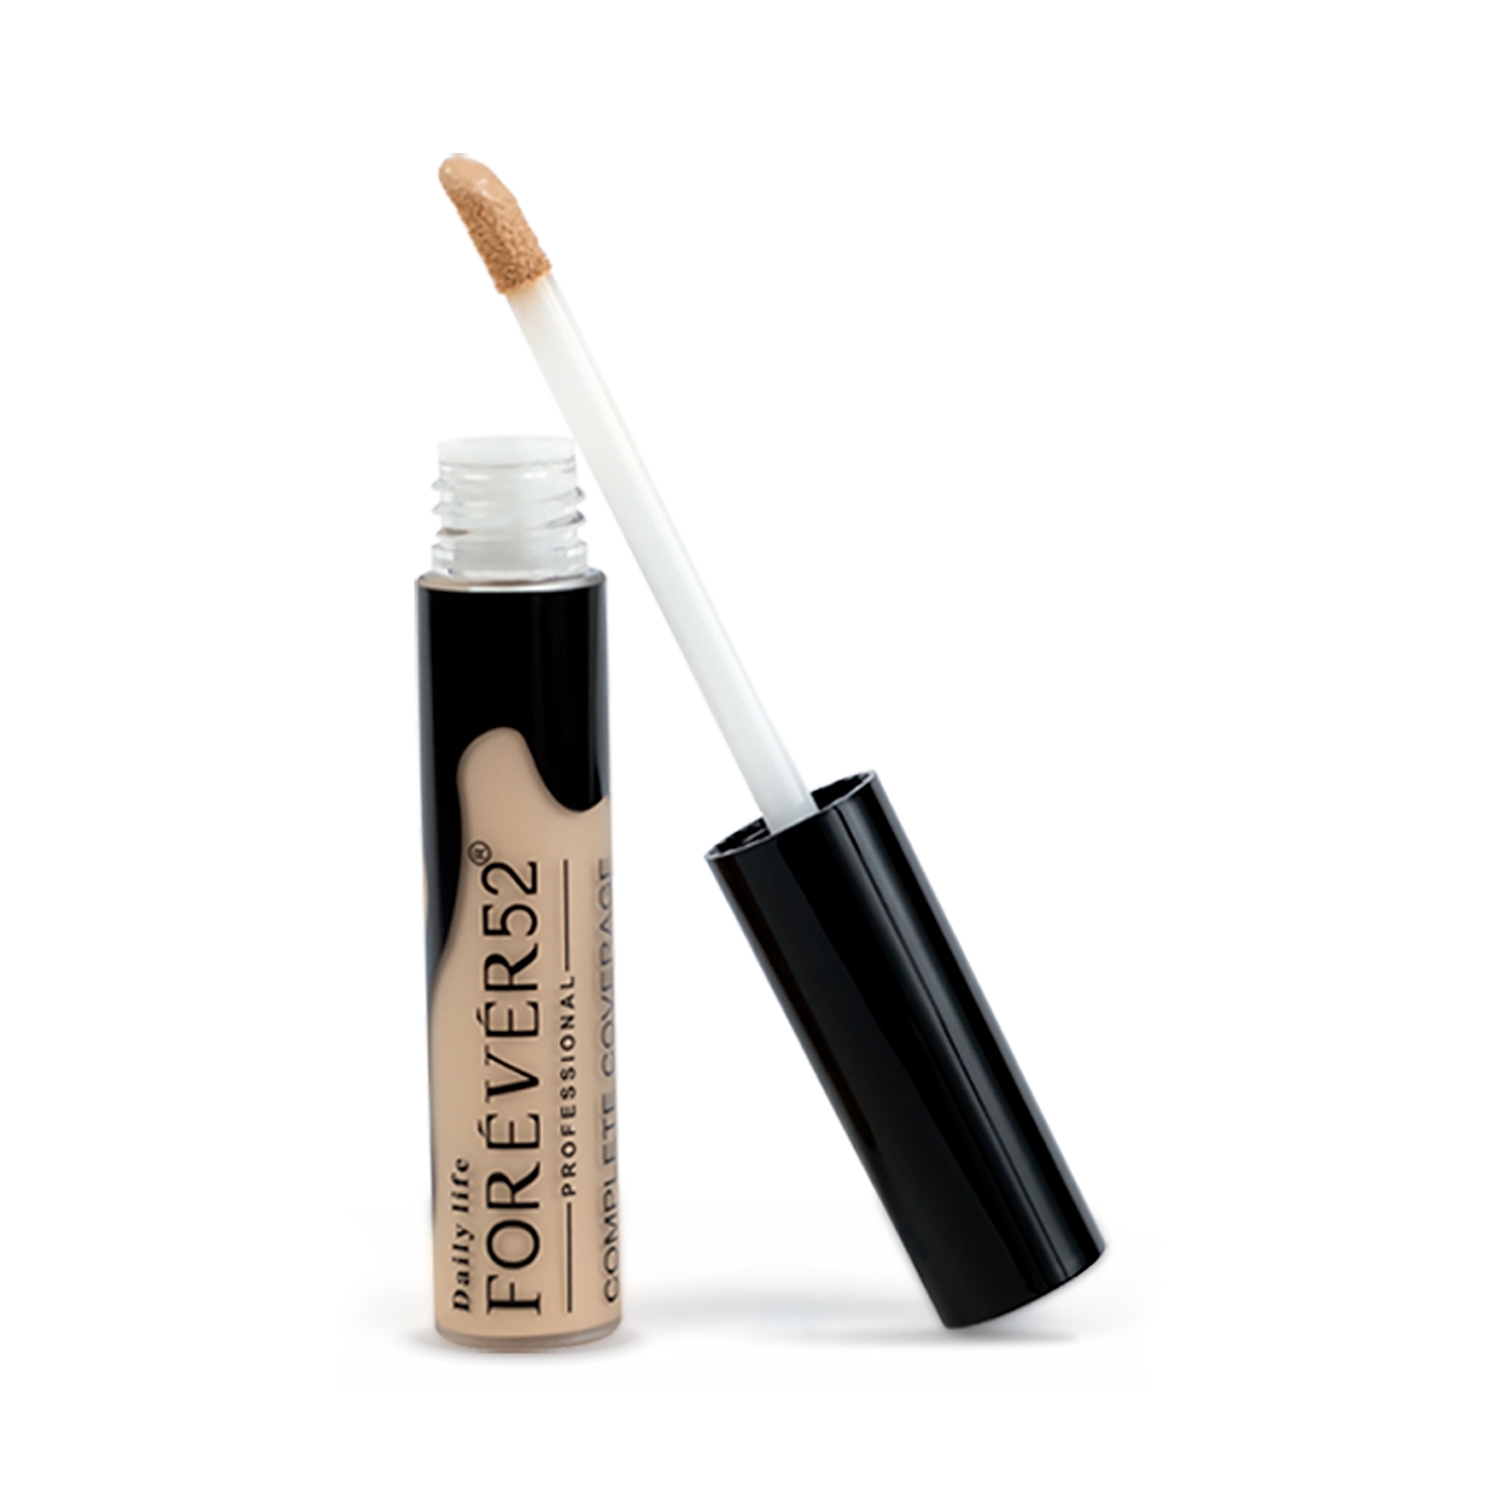 Daily Life Forever52 | Daily Life Forever52 Complete Coverage Concealer COV003 - Iced Coffee (10g)